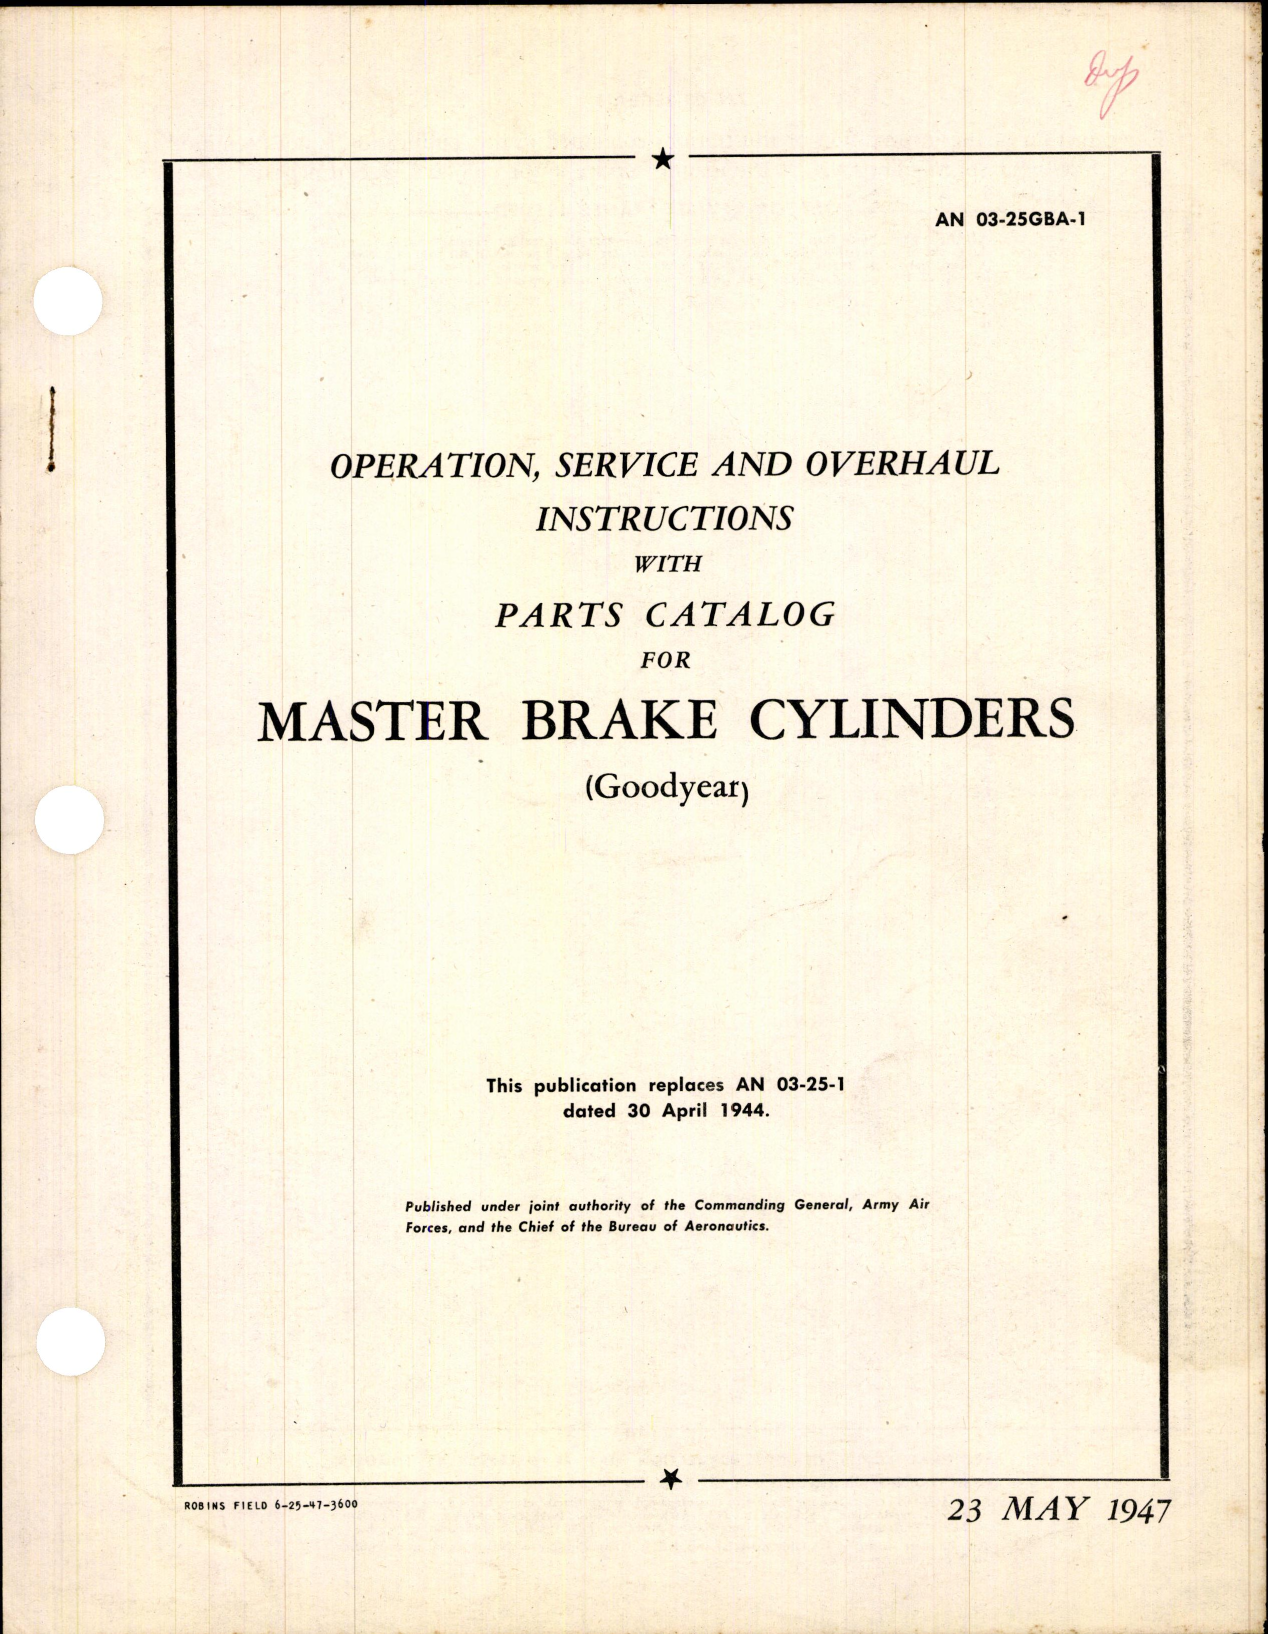 Sample page 1 from AirCorps Library document: Instructions with Parts Catalog for Master Brake Cylinders